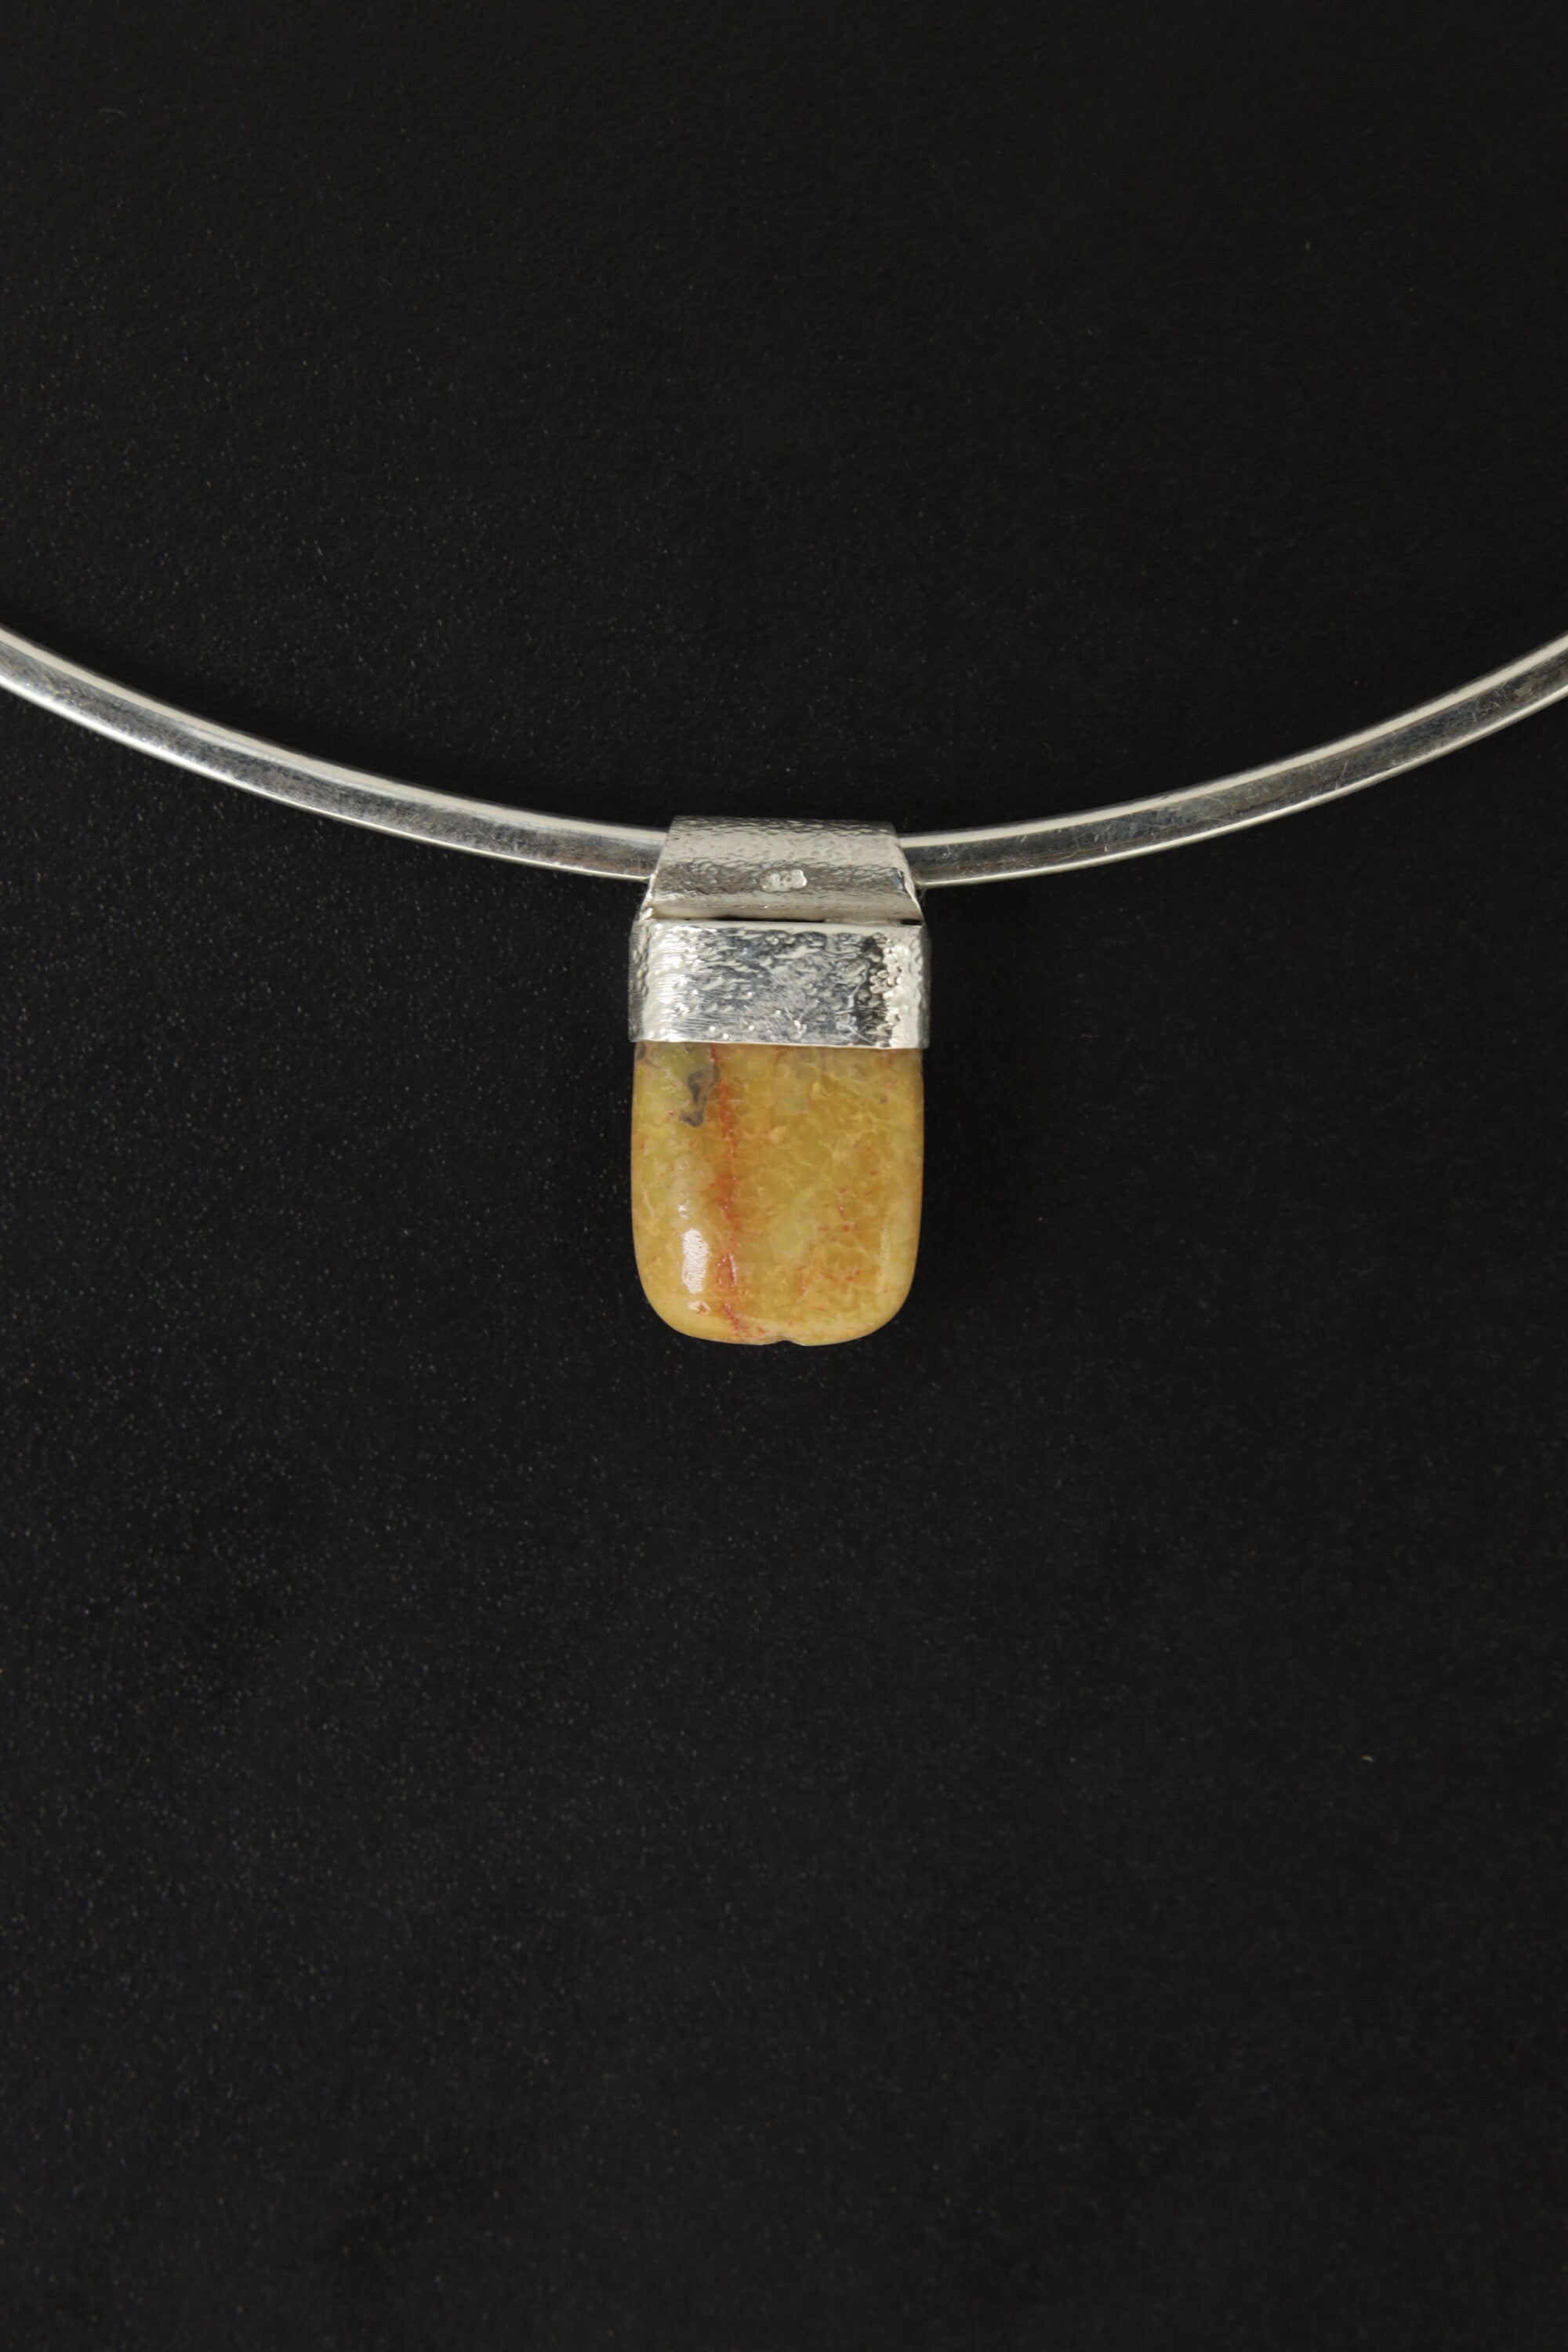 Silicated Bumble Bee Jasper Cabochon - Stack Pendant - Organic Textured 925 Sterling Silver - Crystal Necklace